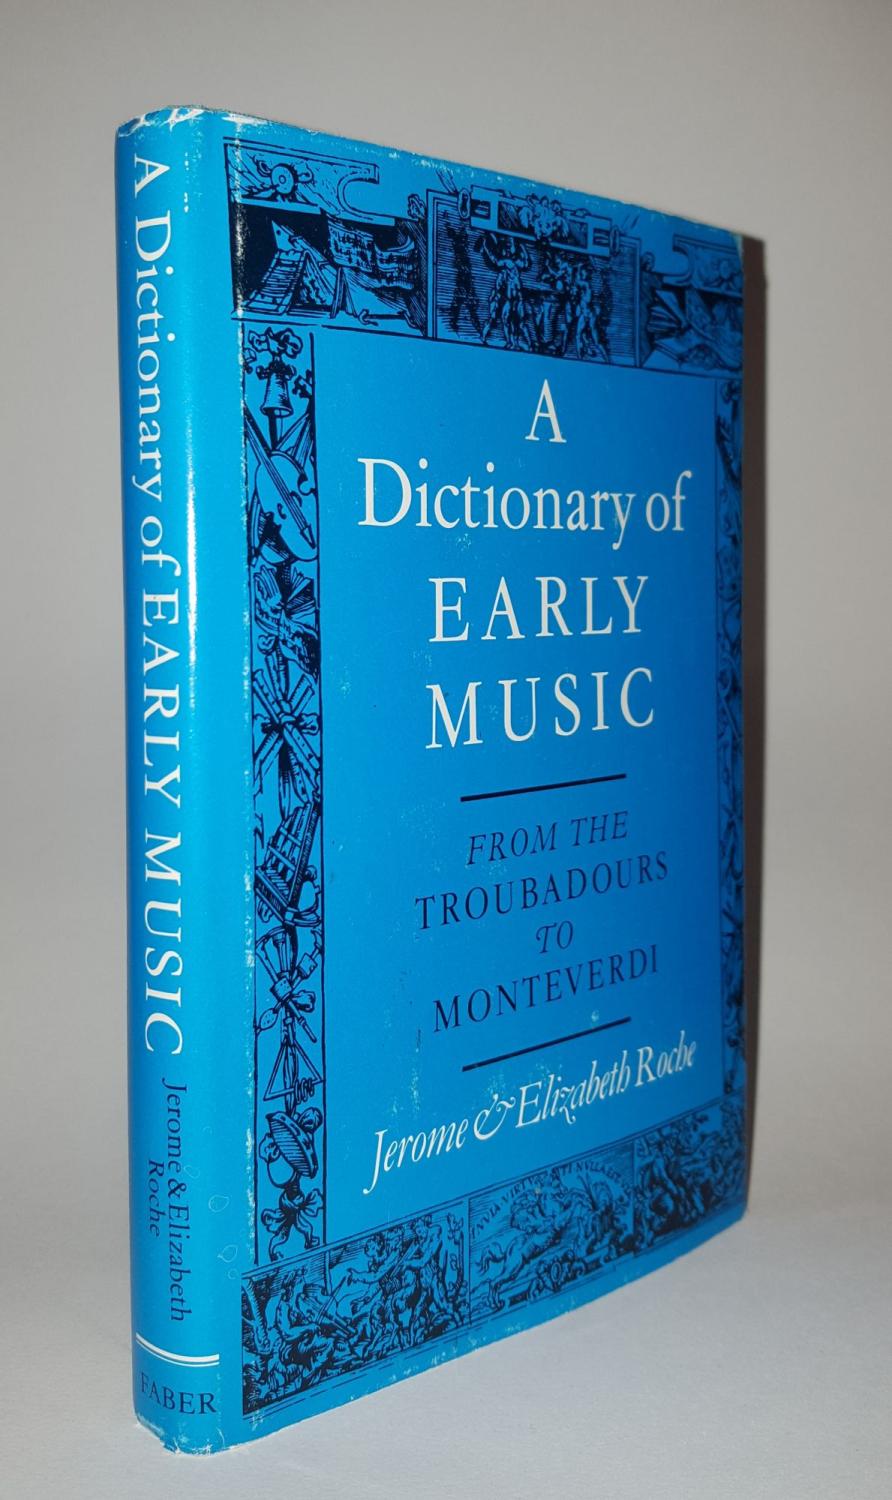 A Dictionary of Early Music From the Troubadours to Monteverdi